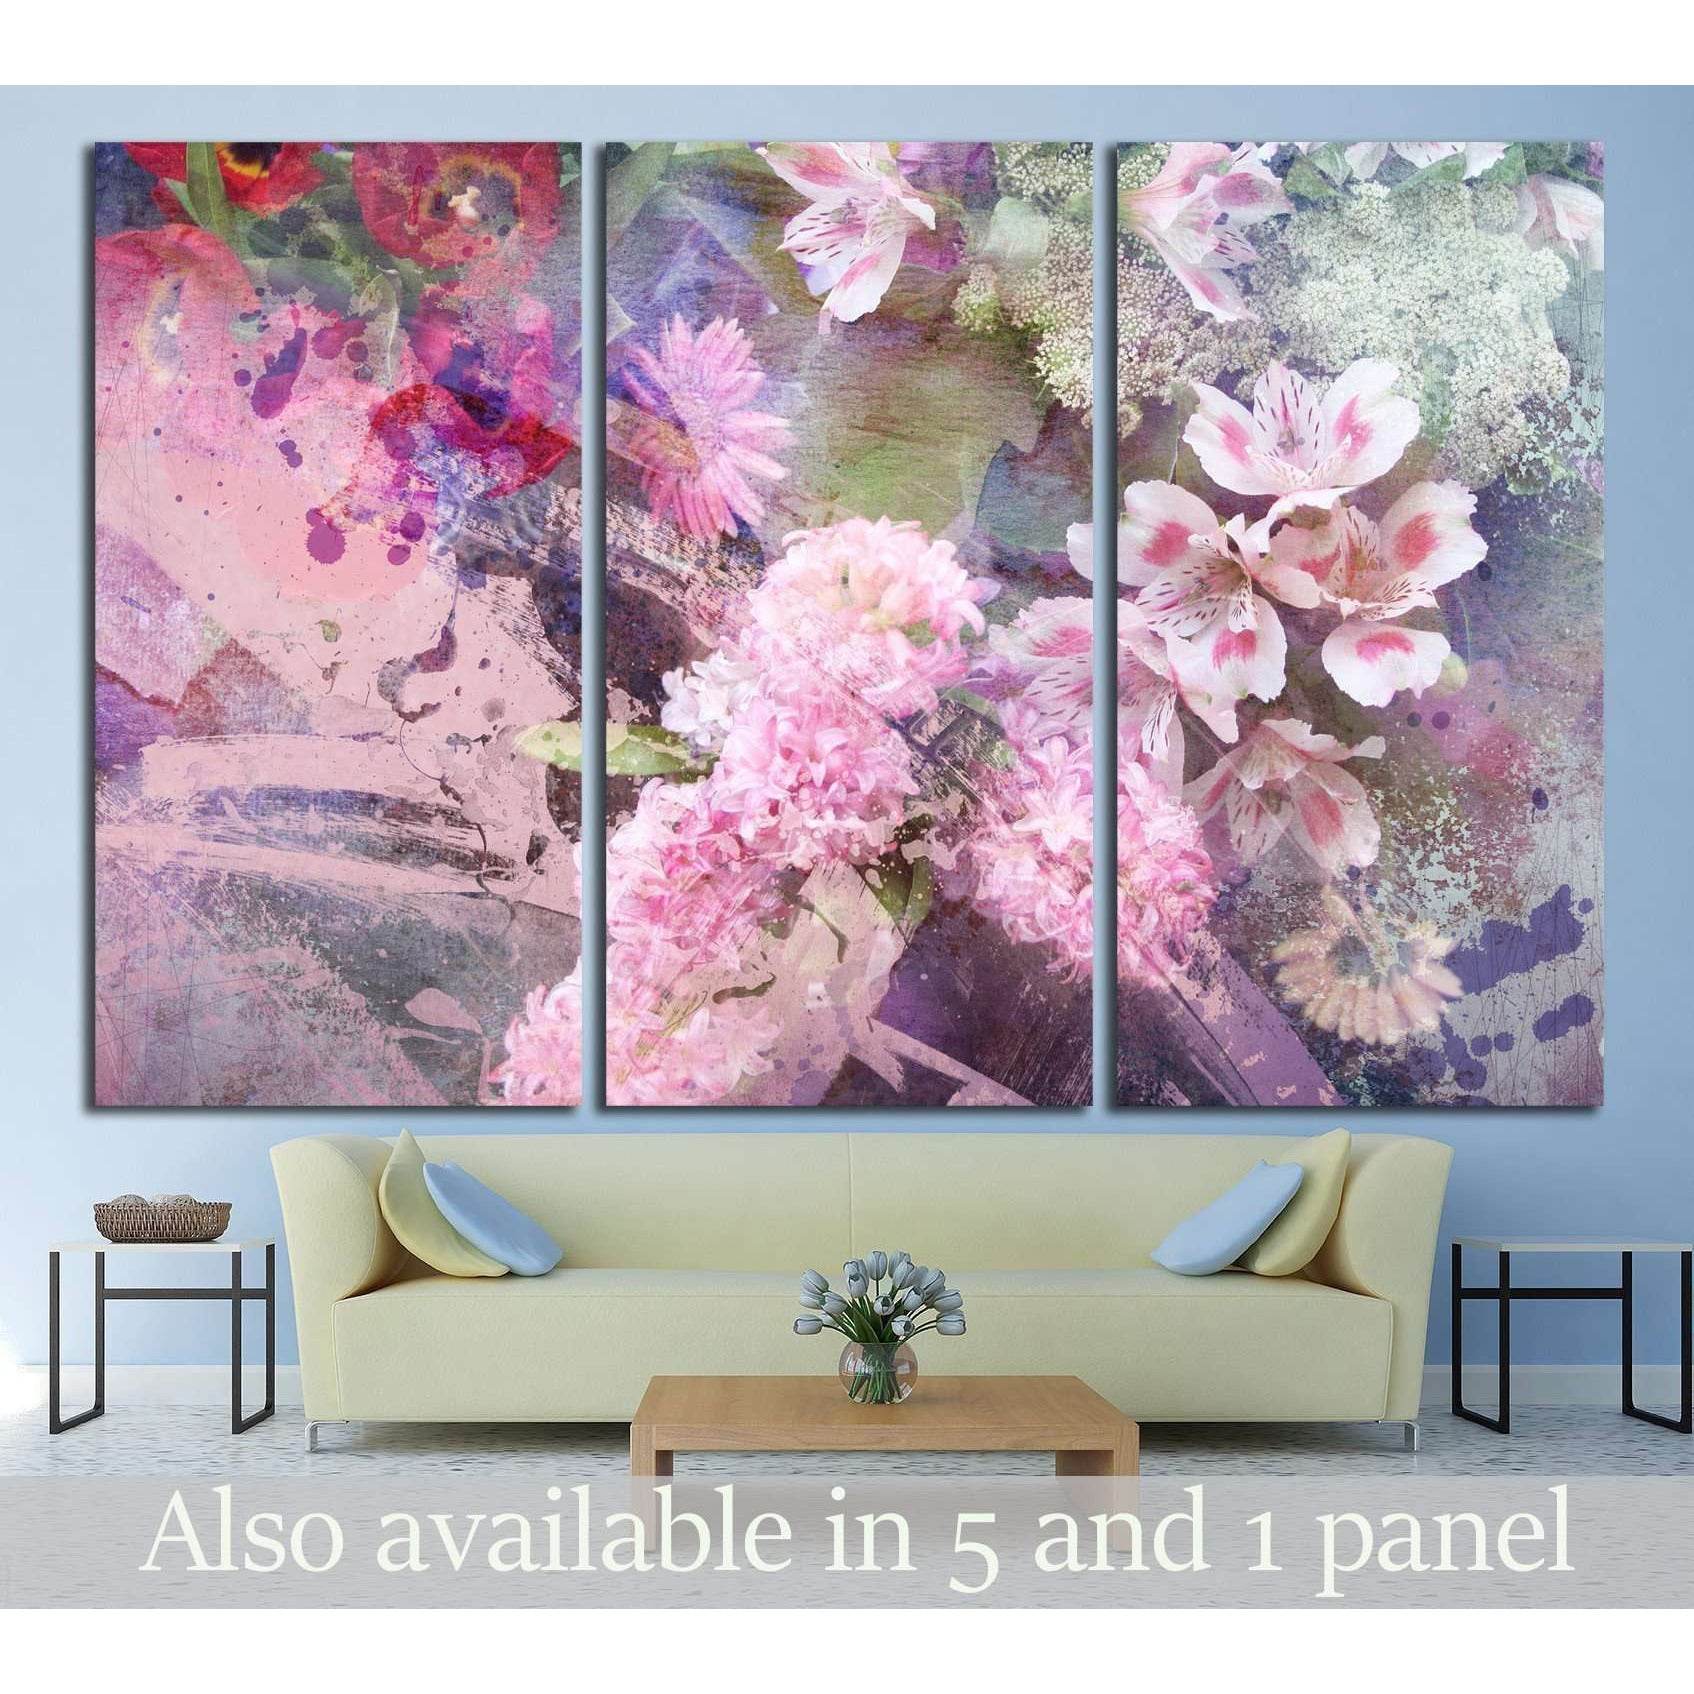 field flowers on paper texture, floral grunge №1347 Ready to Hang Canvas Print